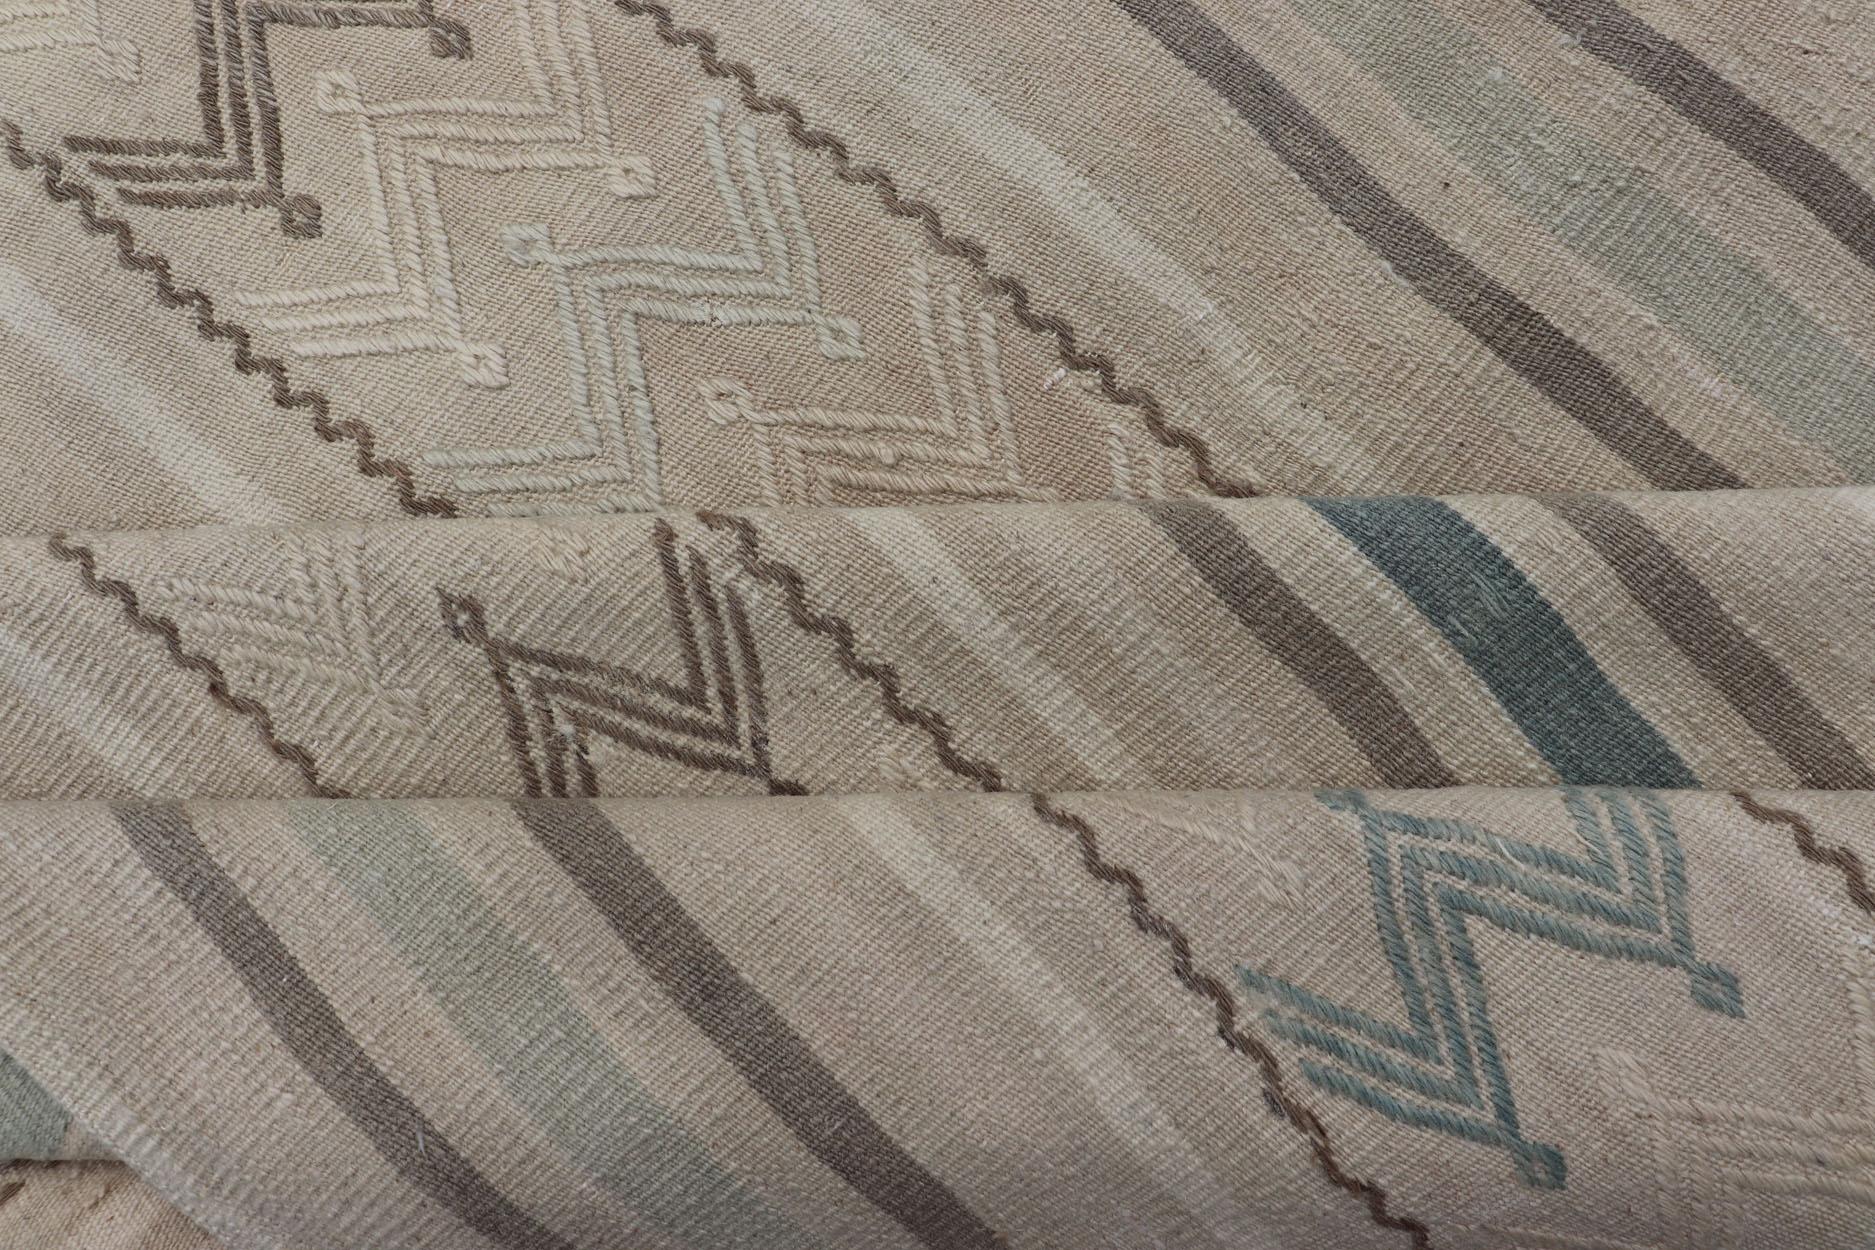 Vintage Turkish Flat-Weave Muted Colored Kilim in Taupe, Brown and Light Blue For Sale 4